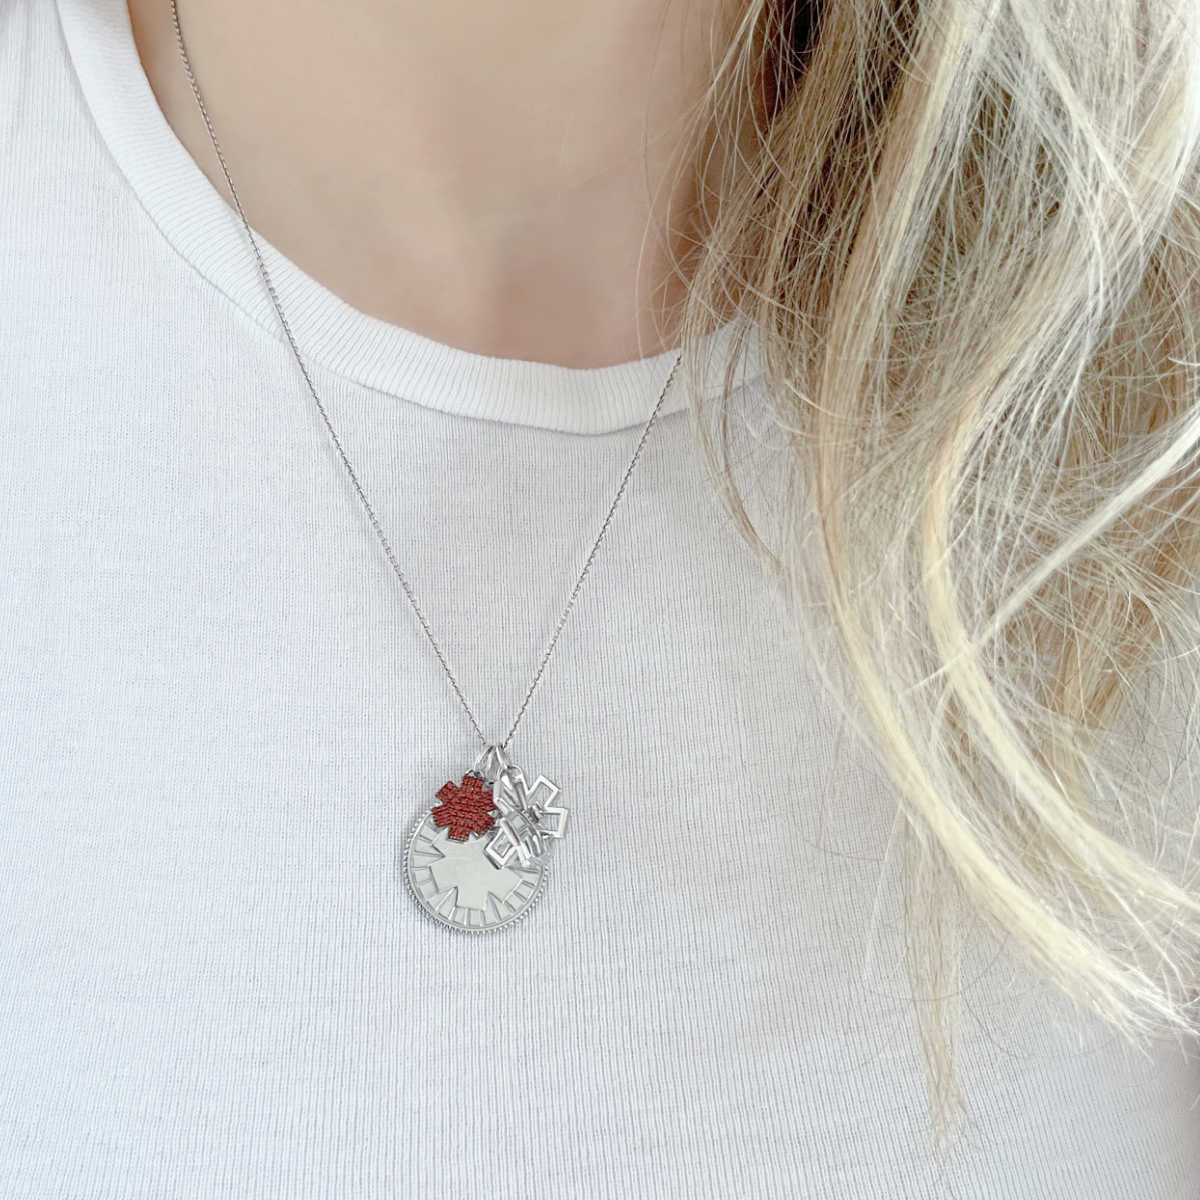 Sterling Silver Medical Alert Necklace | Silver Medical ID Charm for Necklace or Bracelet | Women’s Diabetic Bracelets | Charmed Medical Jewelry